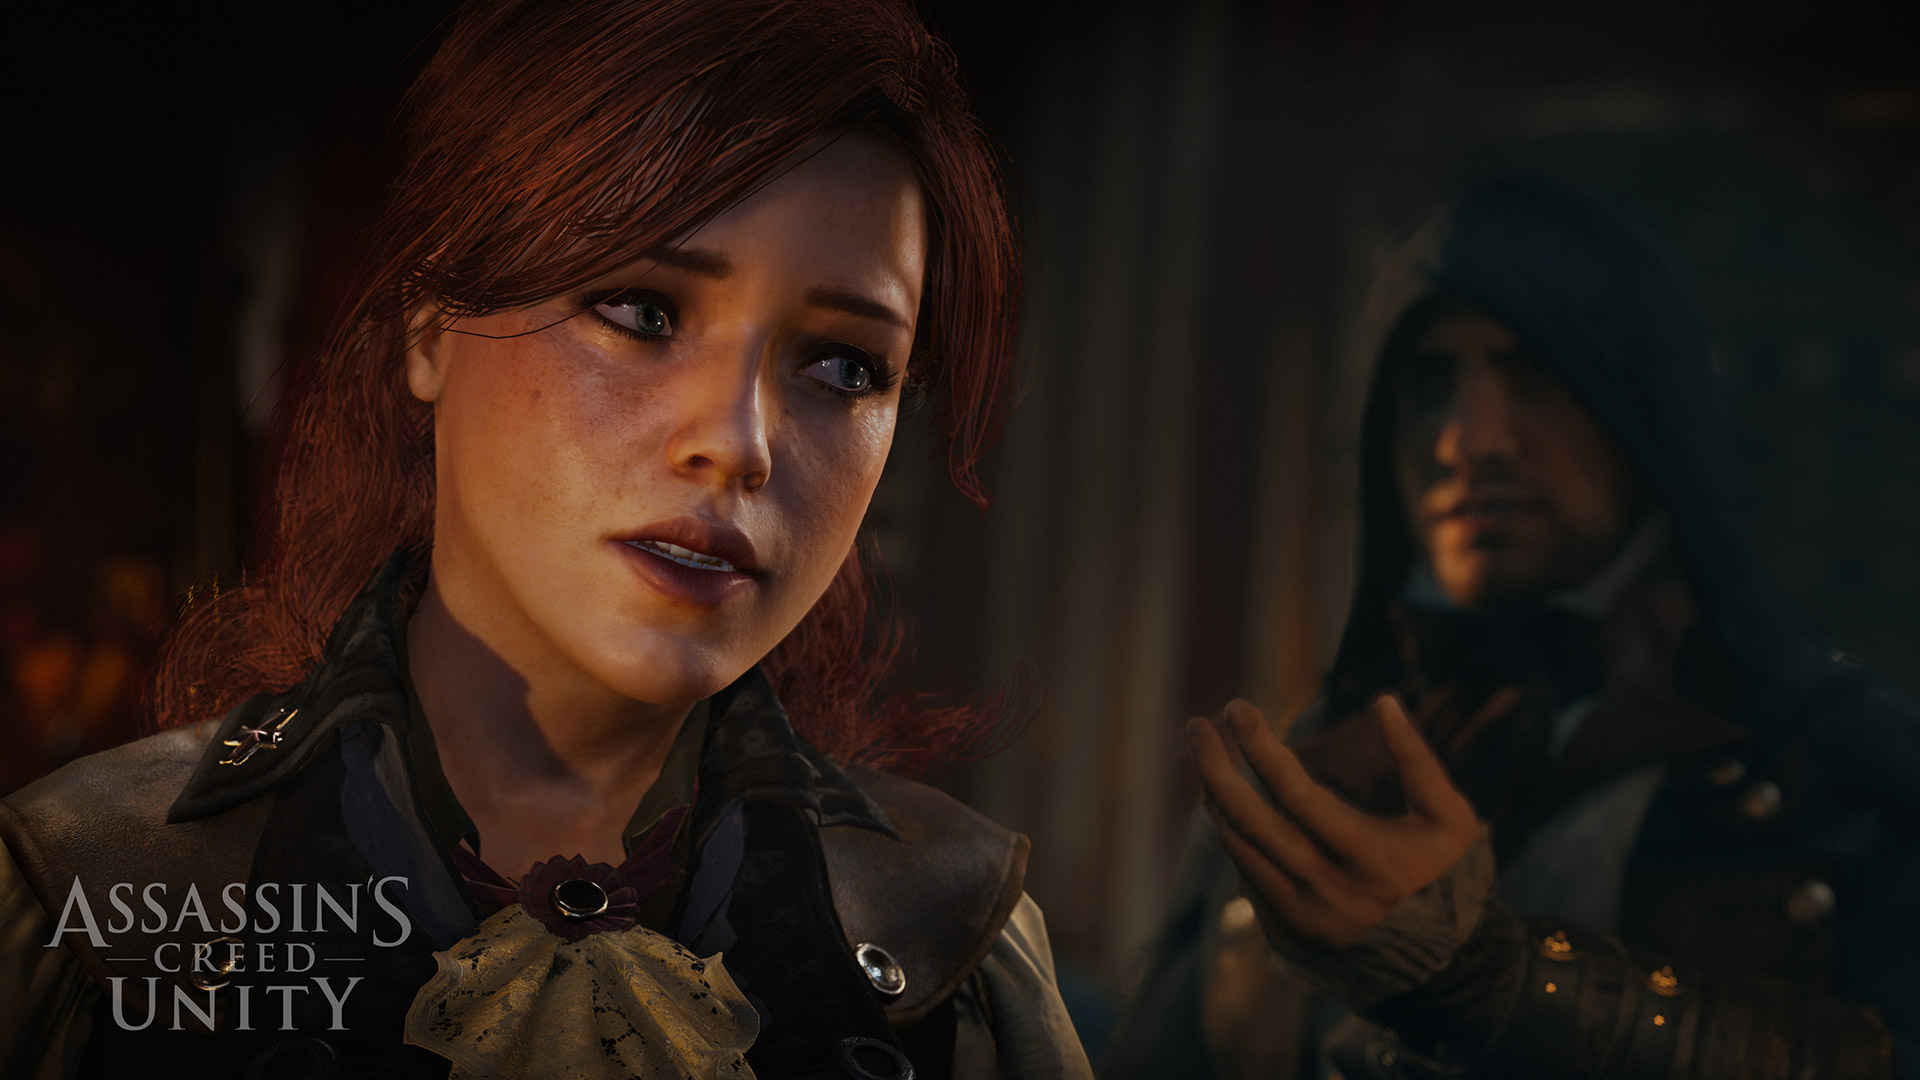 Assassin S Creed - Assassin's Creed Unity Elise - 1920x1080 Wallpaper -  